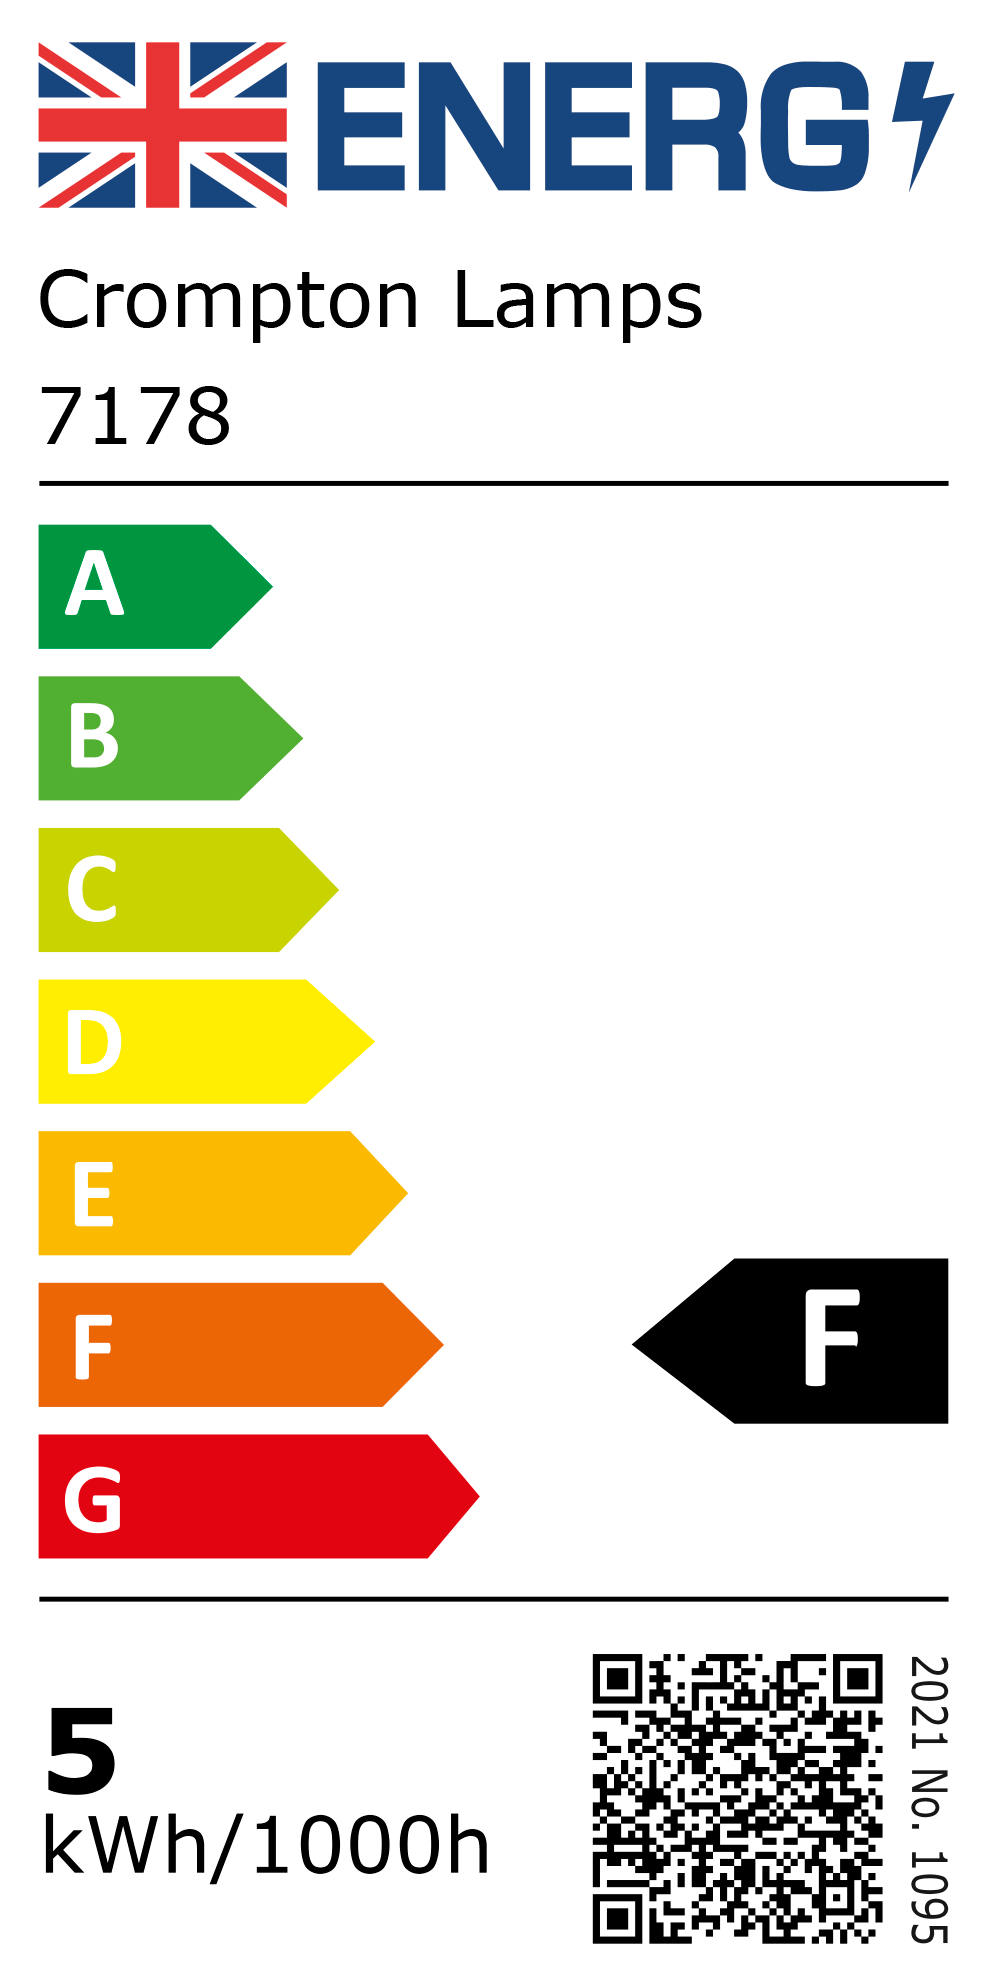 New 2021 Energy Rating Label: Stock Code 7178